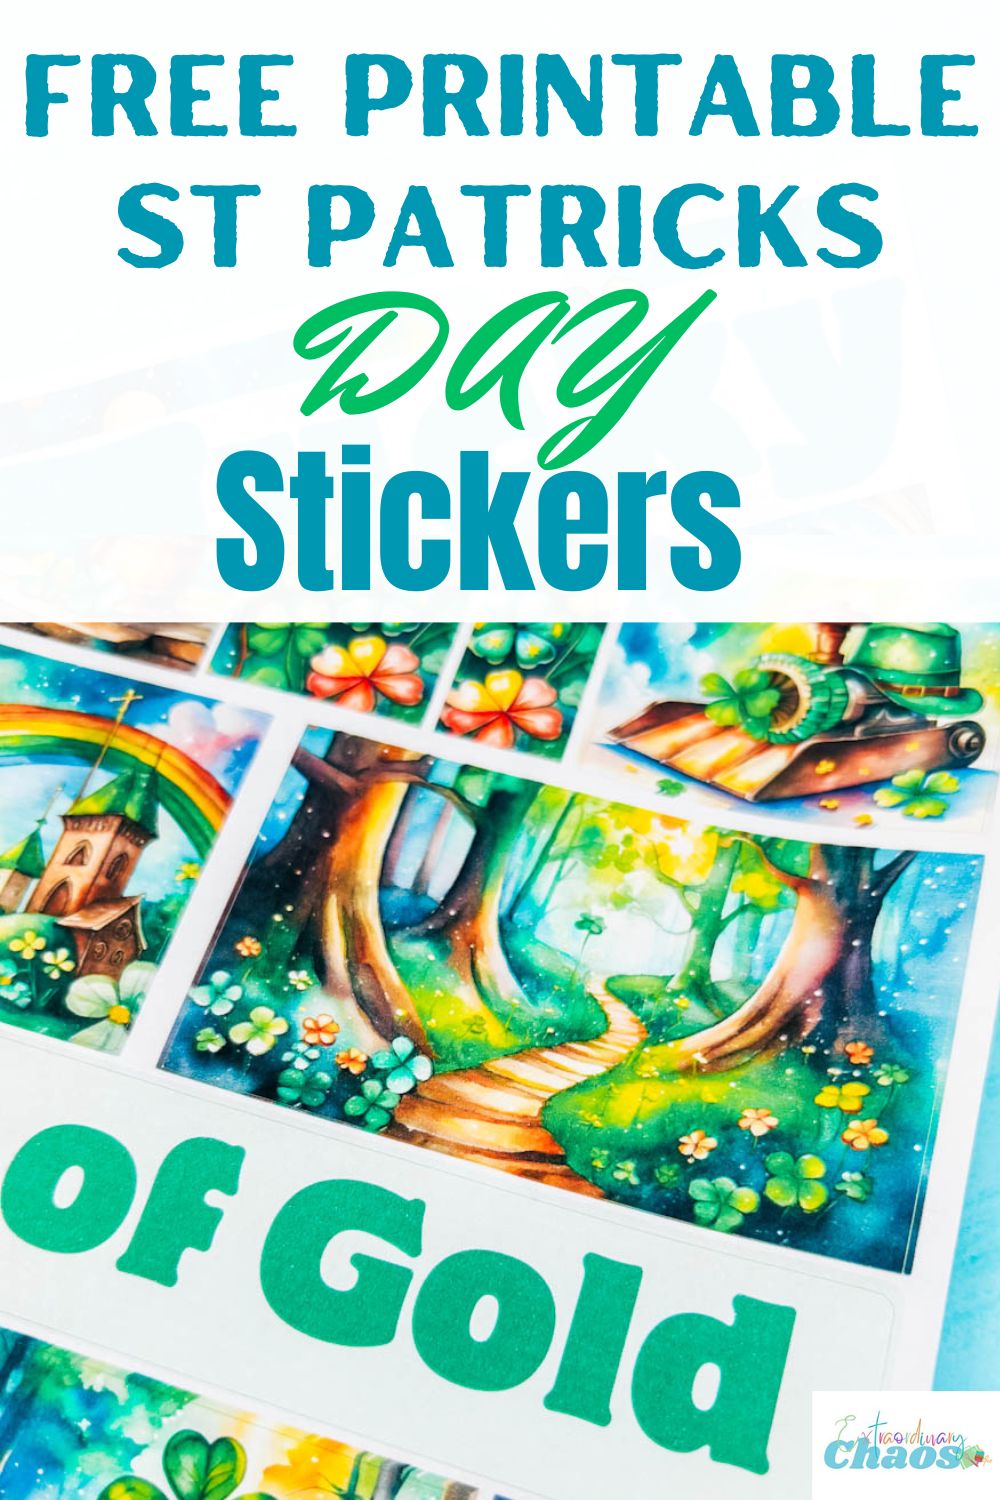 Free printable PDF PNG St Patricks Day Stickers for Cricut and Silhouette